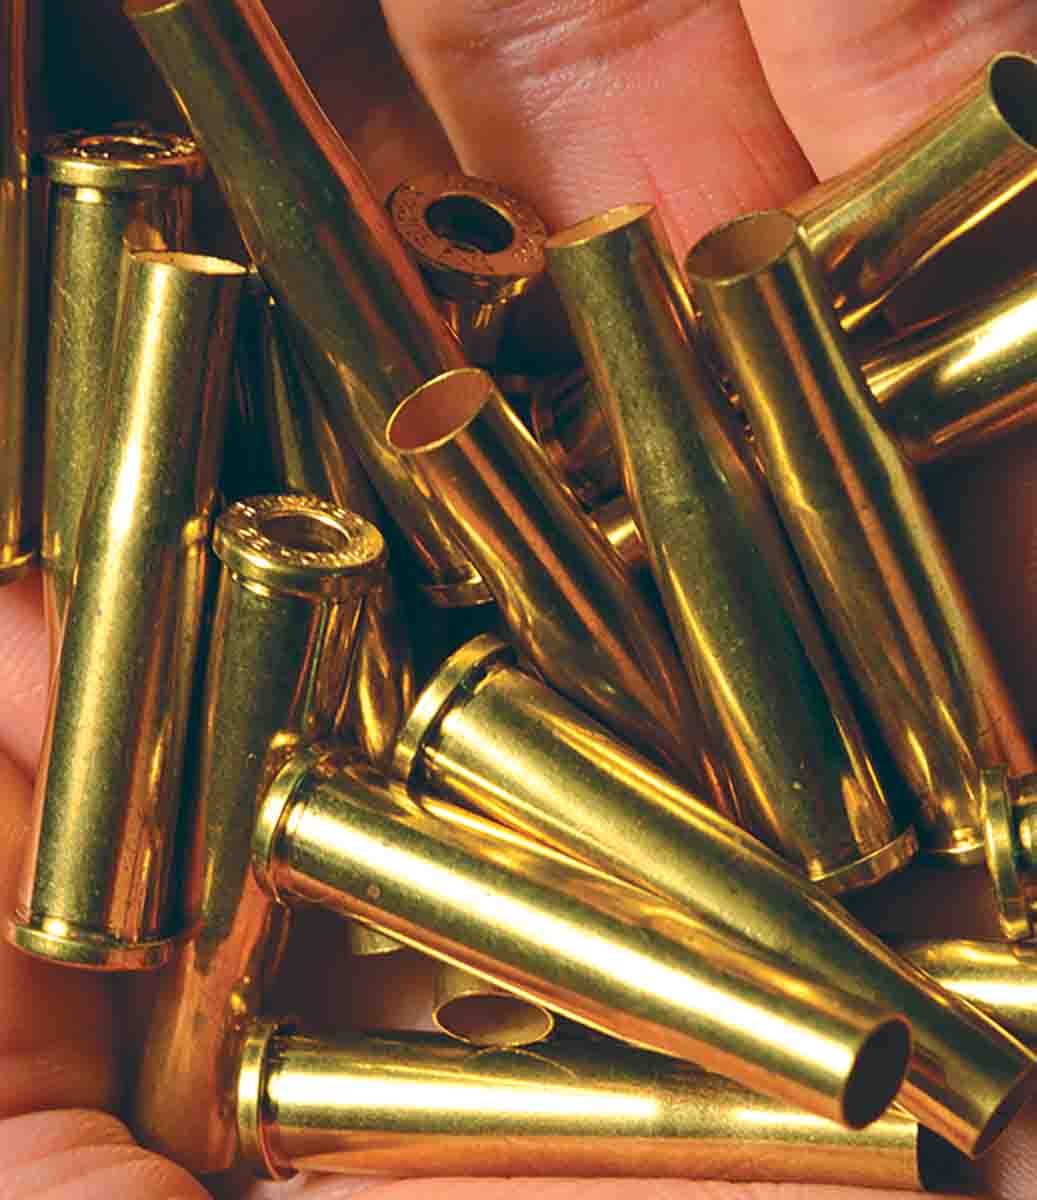 The .22 Hornet, a mild cartridge by today’s standards, can be hazardous if old data and new brass are combined. Around 1950, Hornet brass was made heavier, reducing powder capacity and potentially raising pressure levels with older loading formulas.